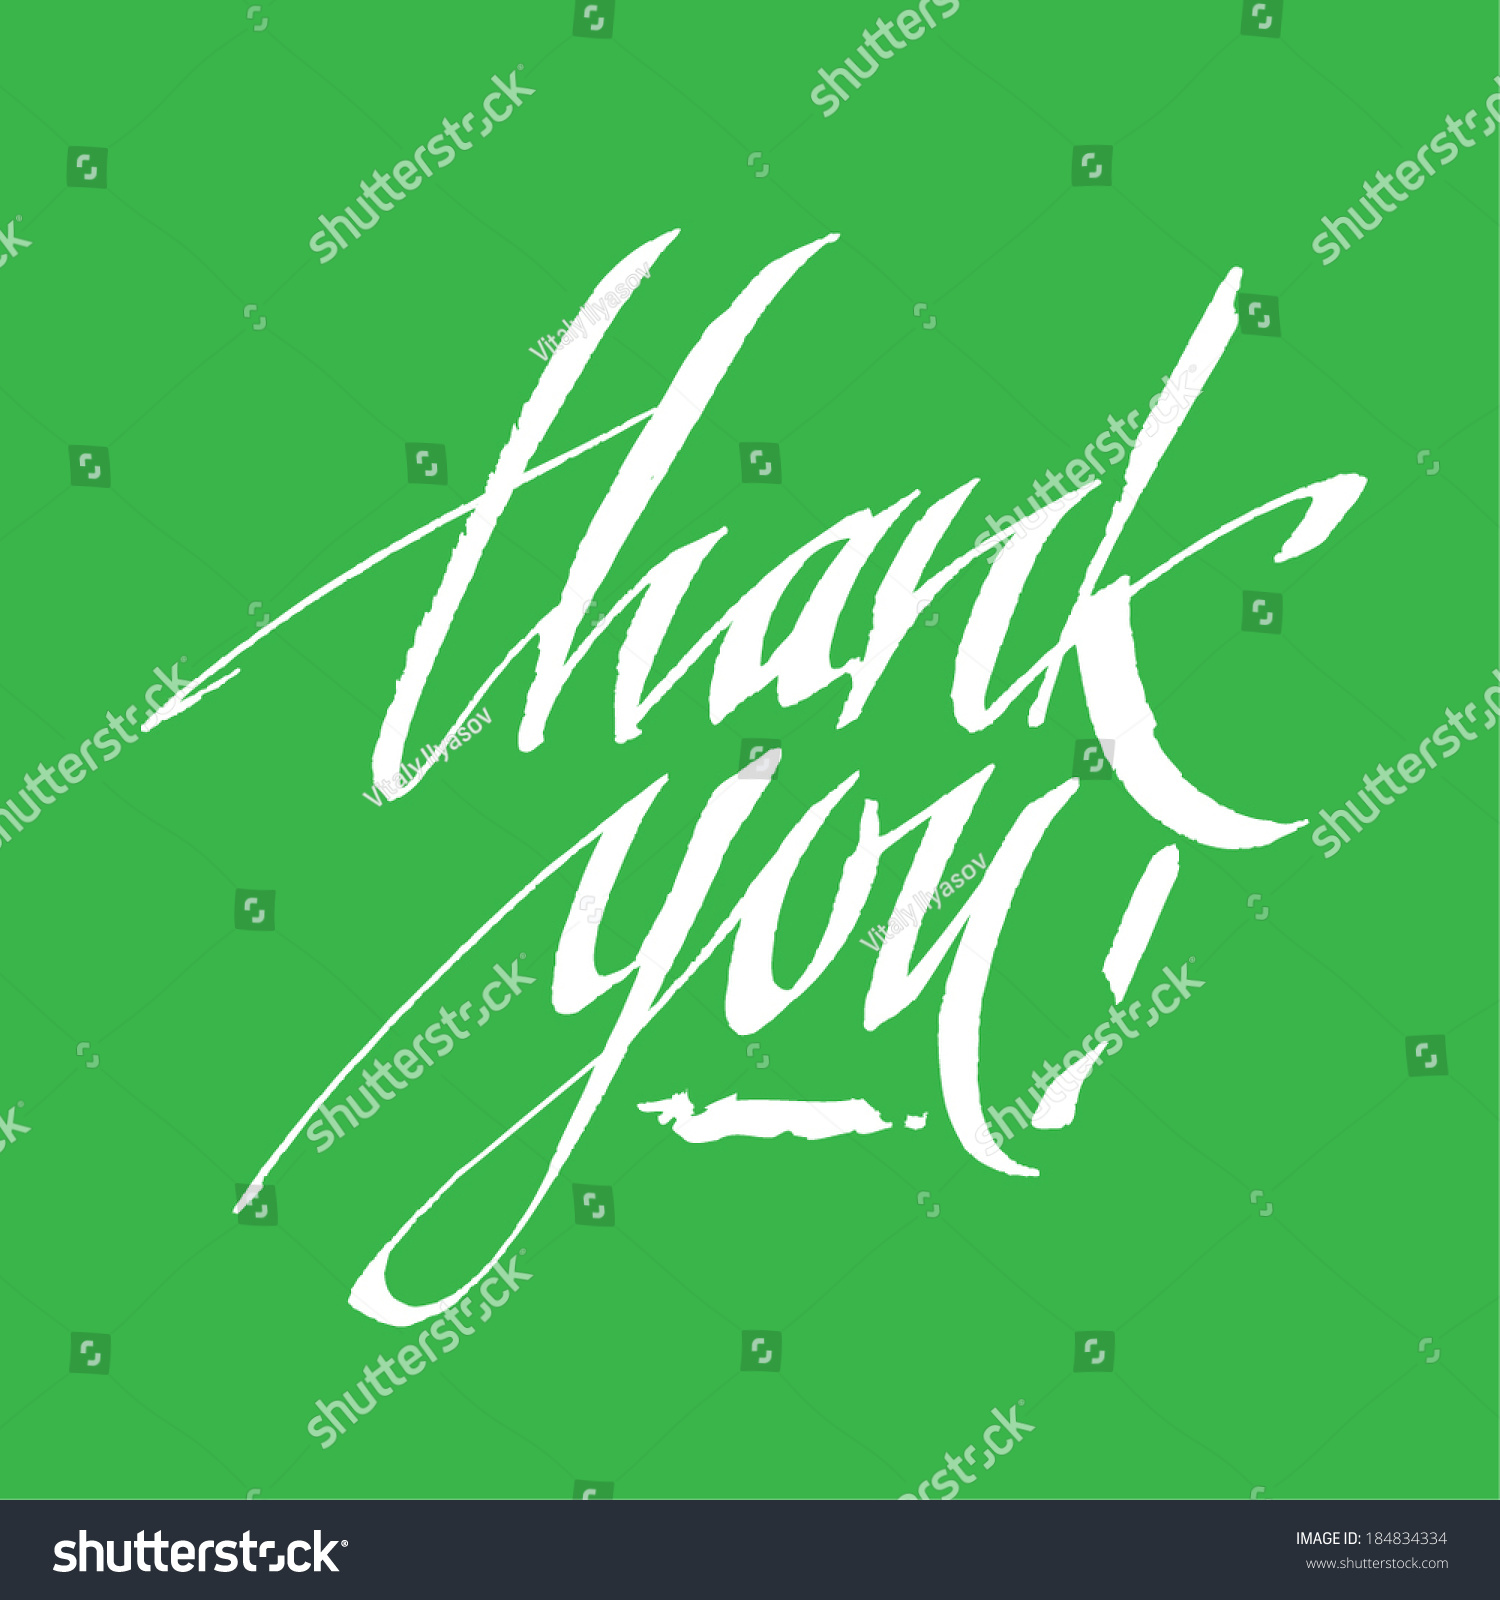 Thank You Calligraphic Lettering Stock Vector Royalty Free 184834334 Shutterstock 5903